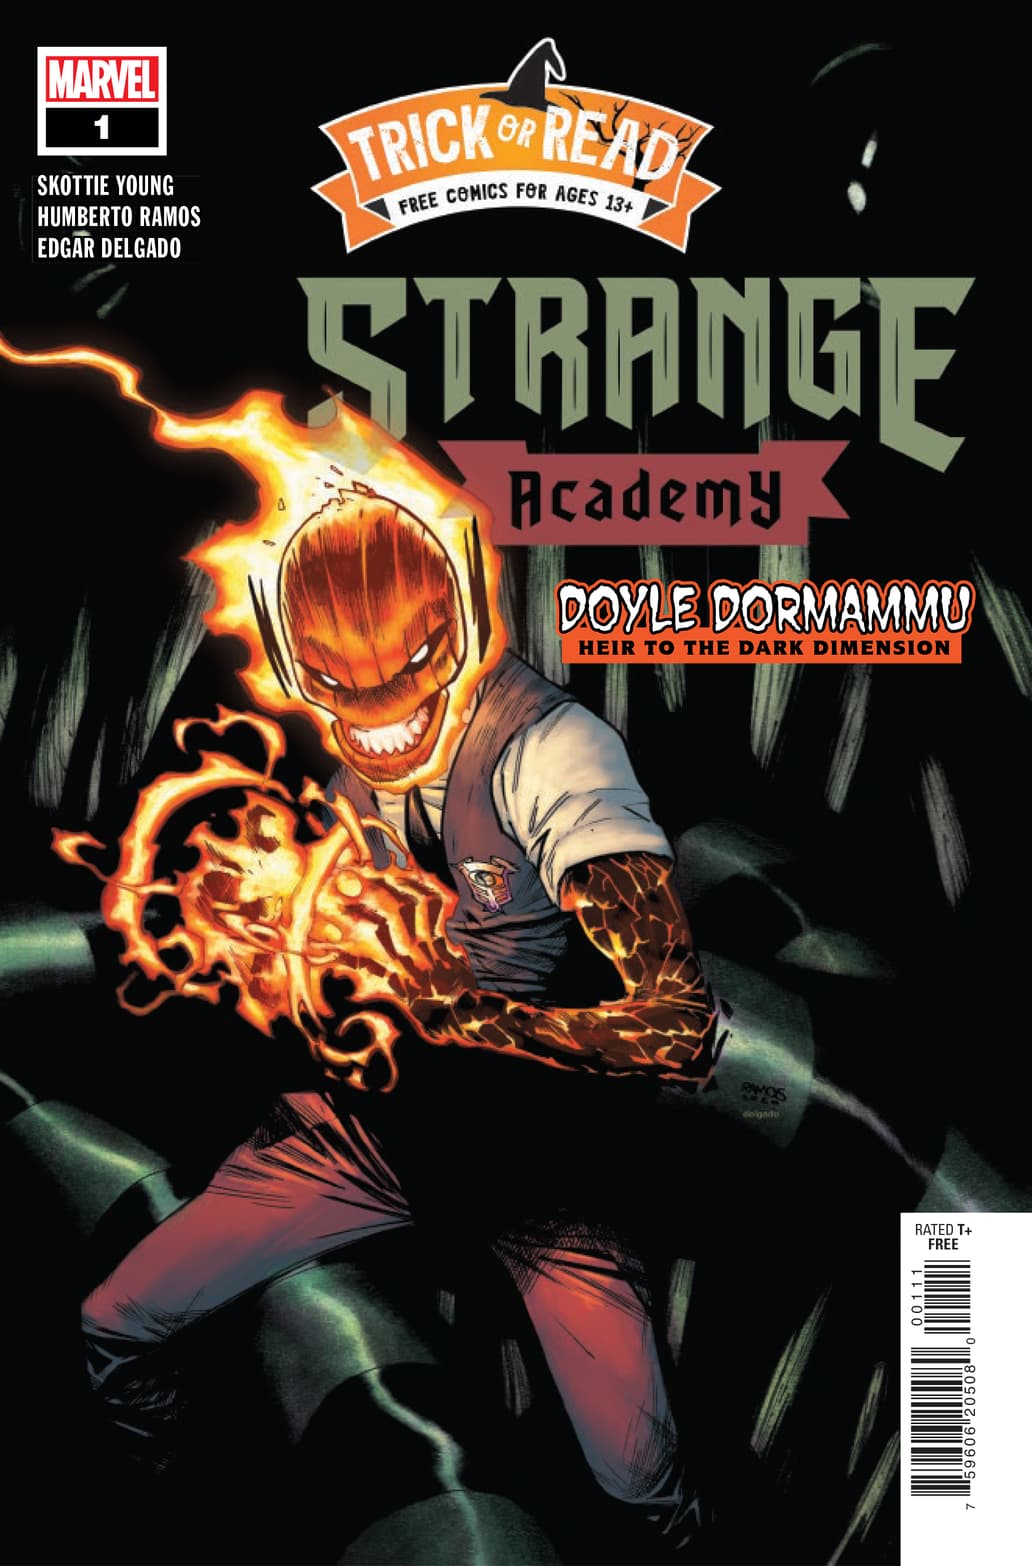 STRANGE ACADEMY #1 HALLOWEEN TRICK-OR-READ 2022: THE SON OF DORMAMMU Cover by HUMBERTO RAMOS